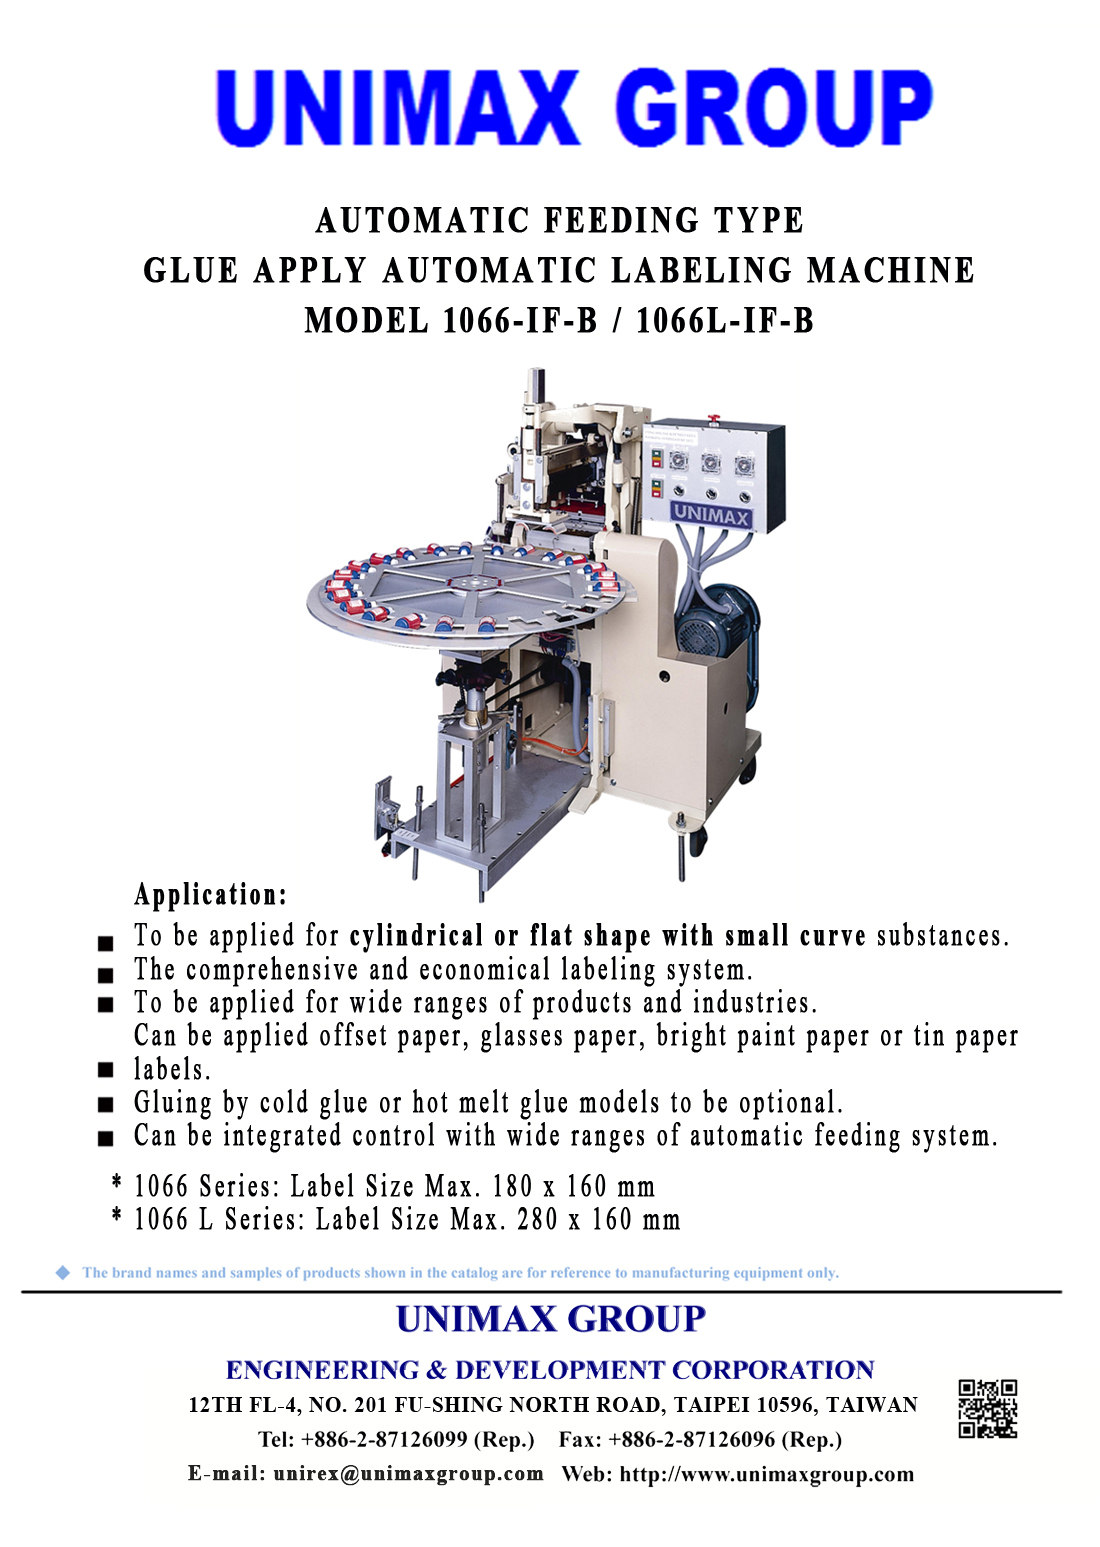 Indexing Automatic Feeding Type 66-IF-B / 66L-IF-B Labeling Machine